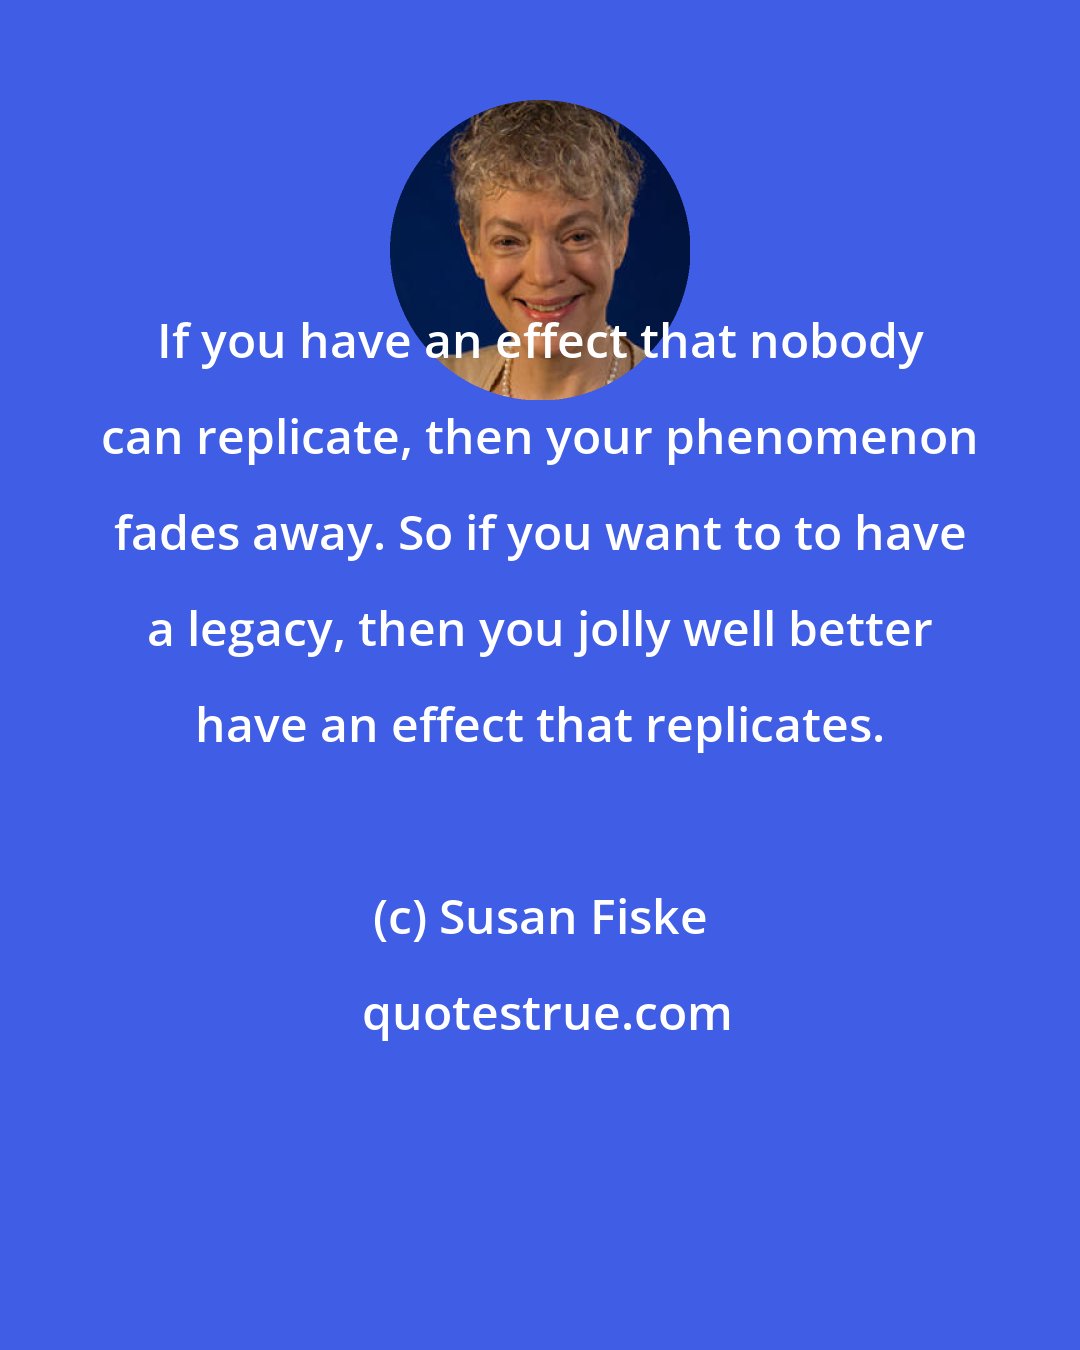 Susan Fiske: If you have an effect that nobody can replicate, then your phenomenon fades away. So if you want to to have a legacy, then you jolly well better have an effect that replicates.